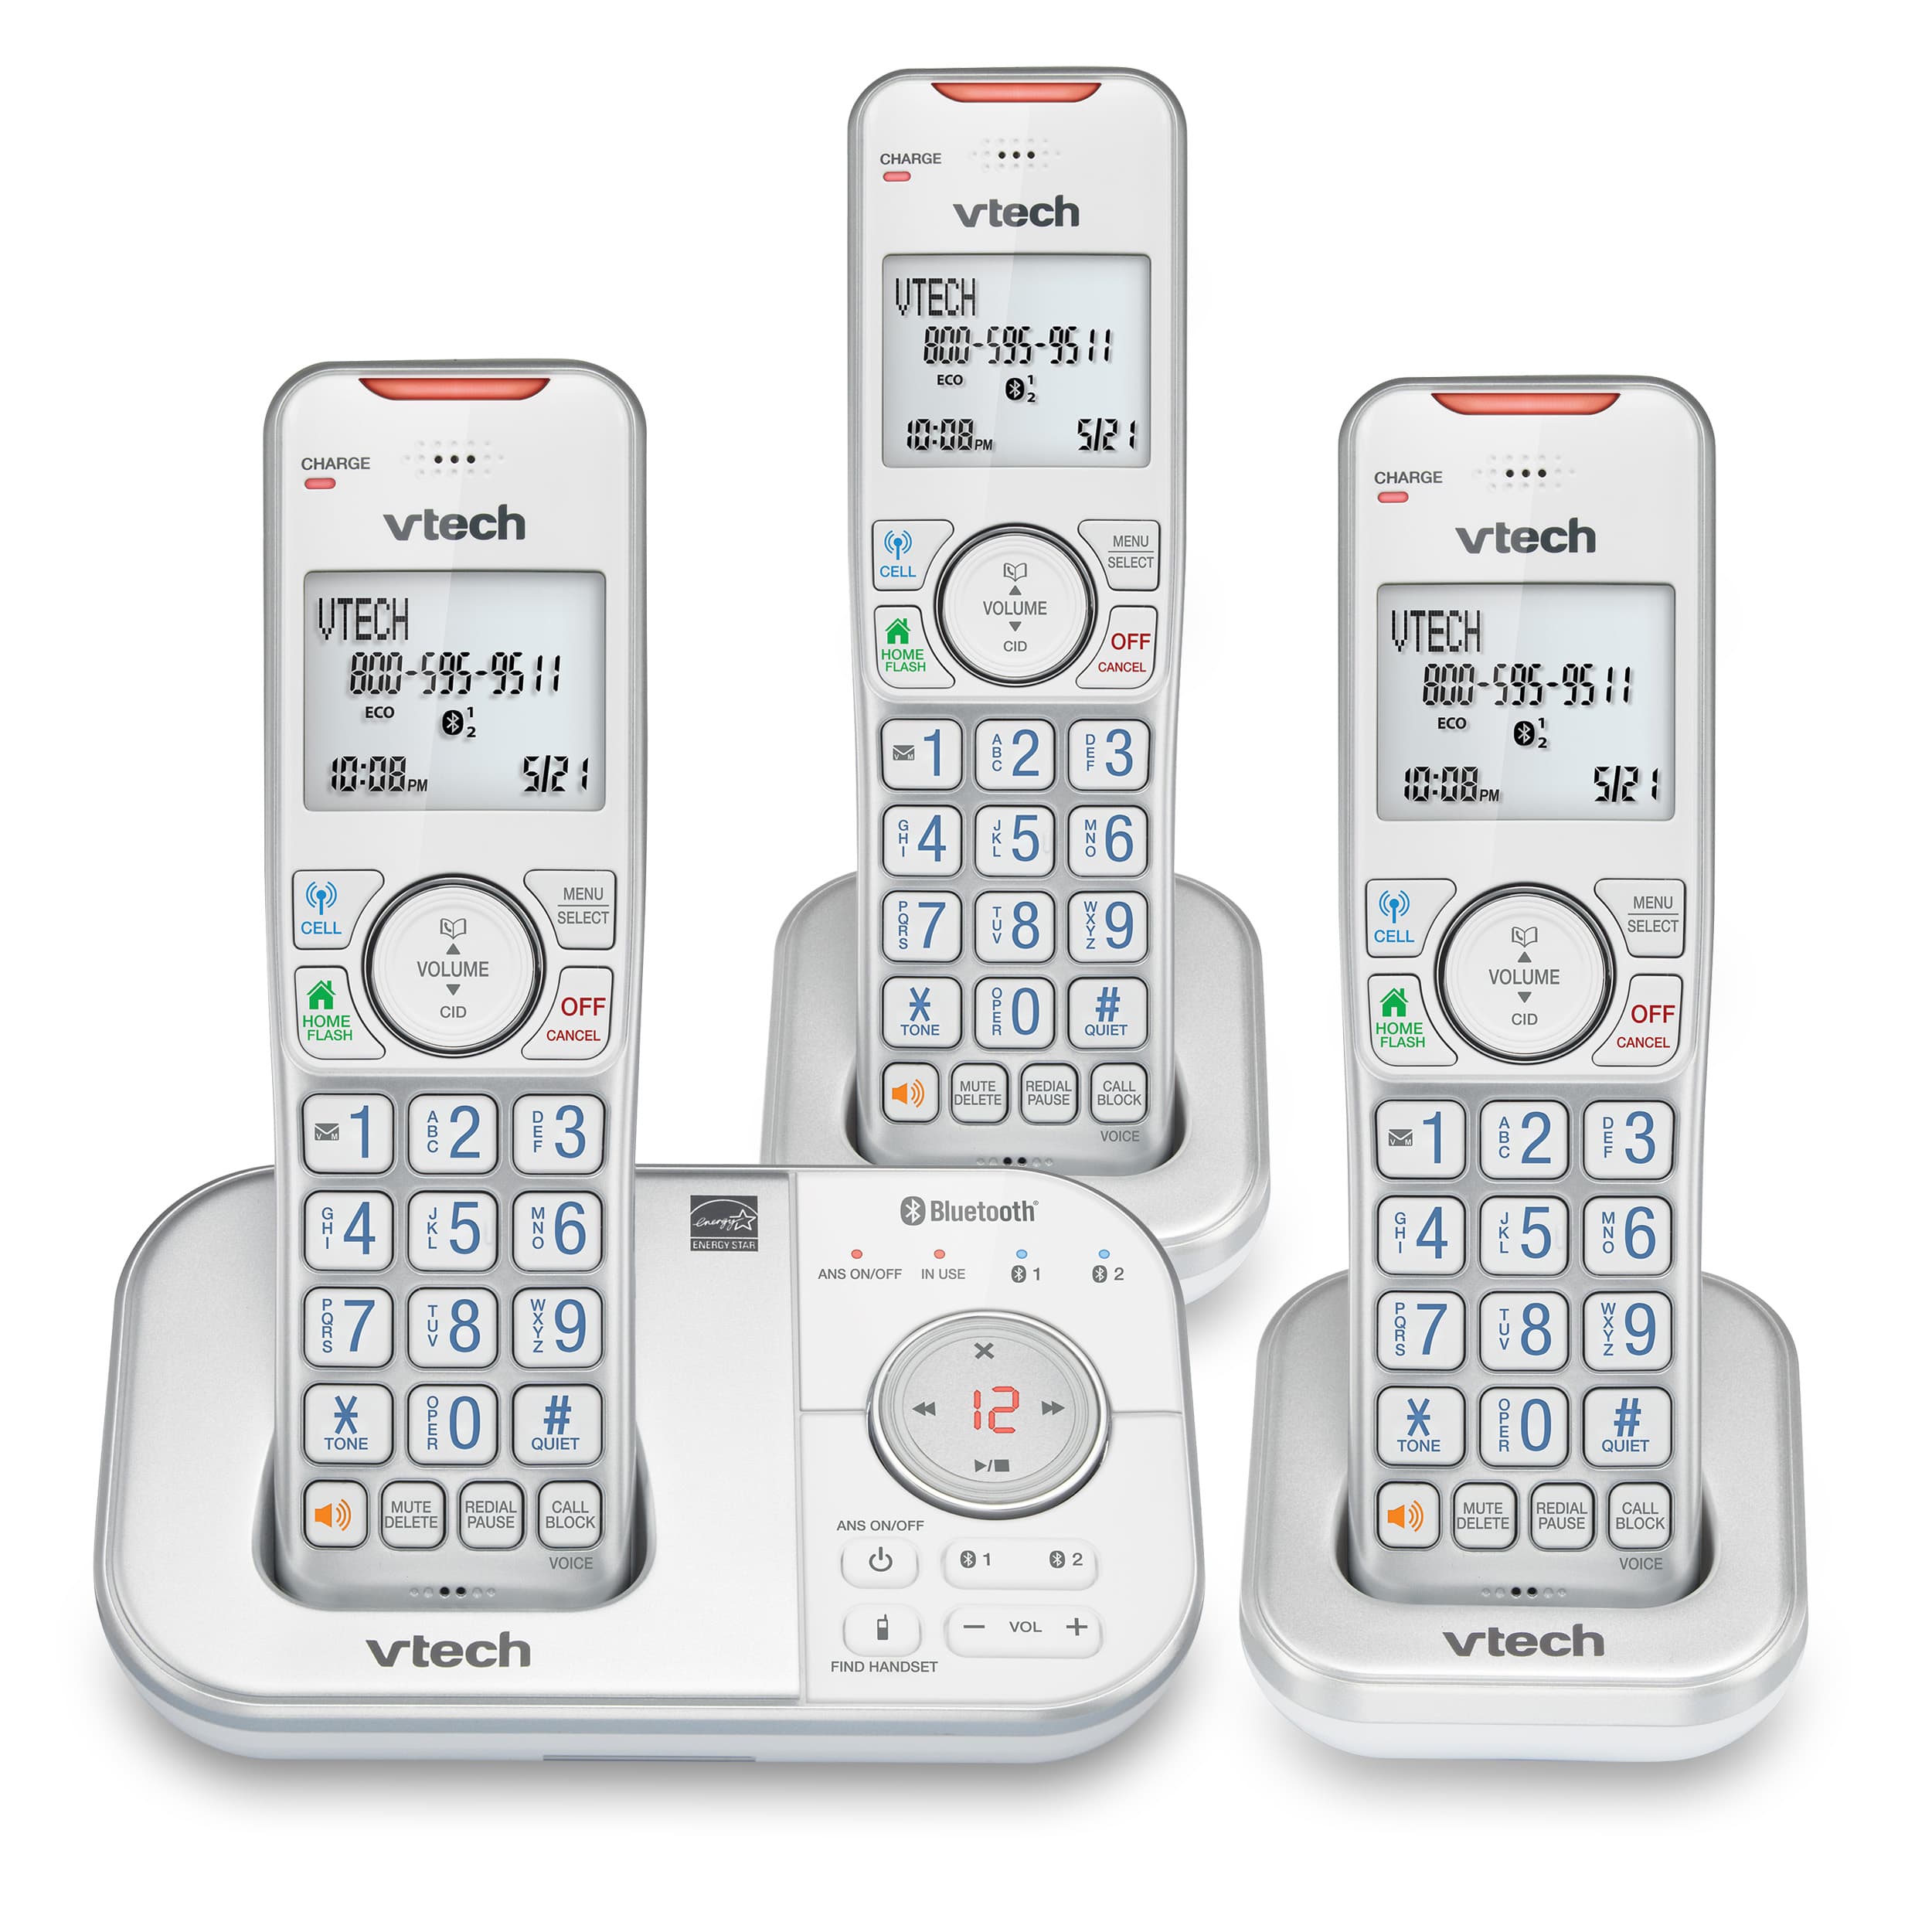 3-Handset Expandable Cordless Phone with Bluetooth Connect to Cell, Smart Call Blocker and Answering System (Silver & White) - view 1